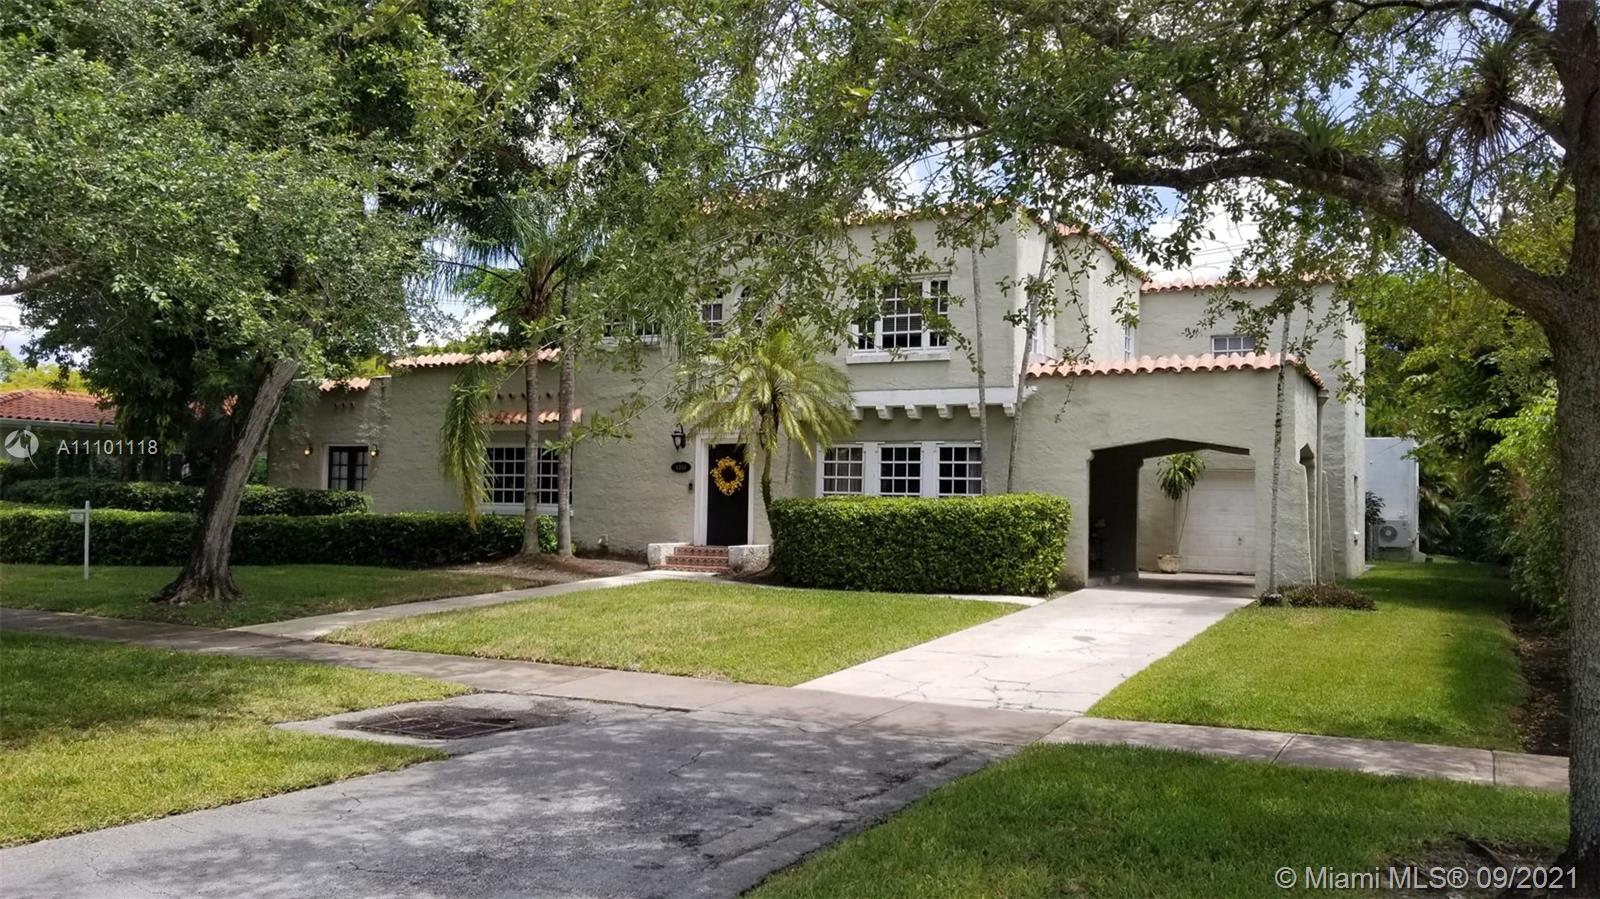 A beautiful Coral Gables, Mediterranean style home with Spanish tile roof lines, a family home with traditional floor plan on entry level are a spacious living and dinning room, a large bedroom, a playroom, a wonderful Florida room and a bright library/ office with entrance, full bath, kitchen & laundry. There are two large bedrooms, & a small library/ small office/ storage area, a nice sitting area/ study overlooking front of home, and a full bath on the second floor. The home has lots of interior arches, beautiful Florida Pine hard wood floors throughout and Mexican tile in the kitchen. This home sits on a regular rectangular 10,000 ft. lot, leaving room for expansion and a pool. Within walking distance of a 9 hole golf course, 3 parks & 20 tennis courts and 2 elem. schools